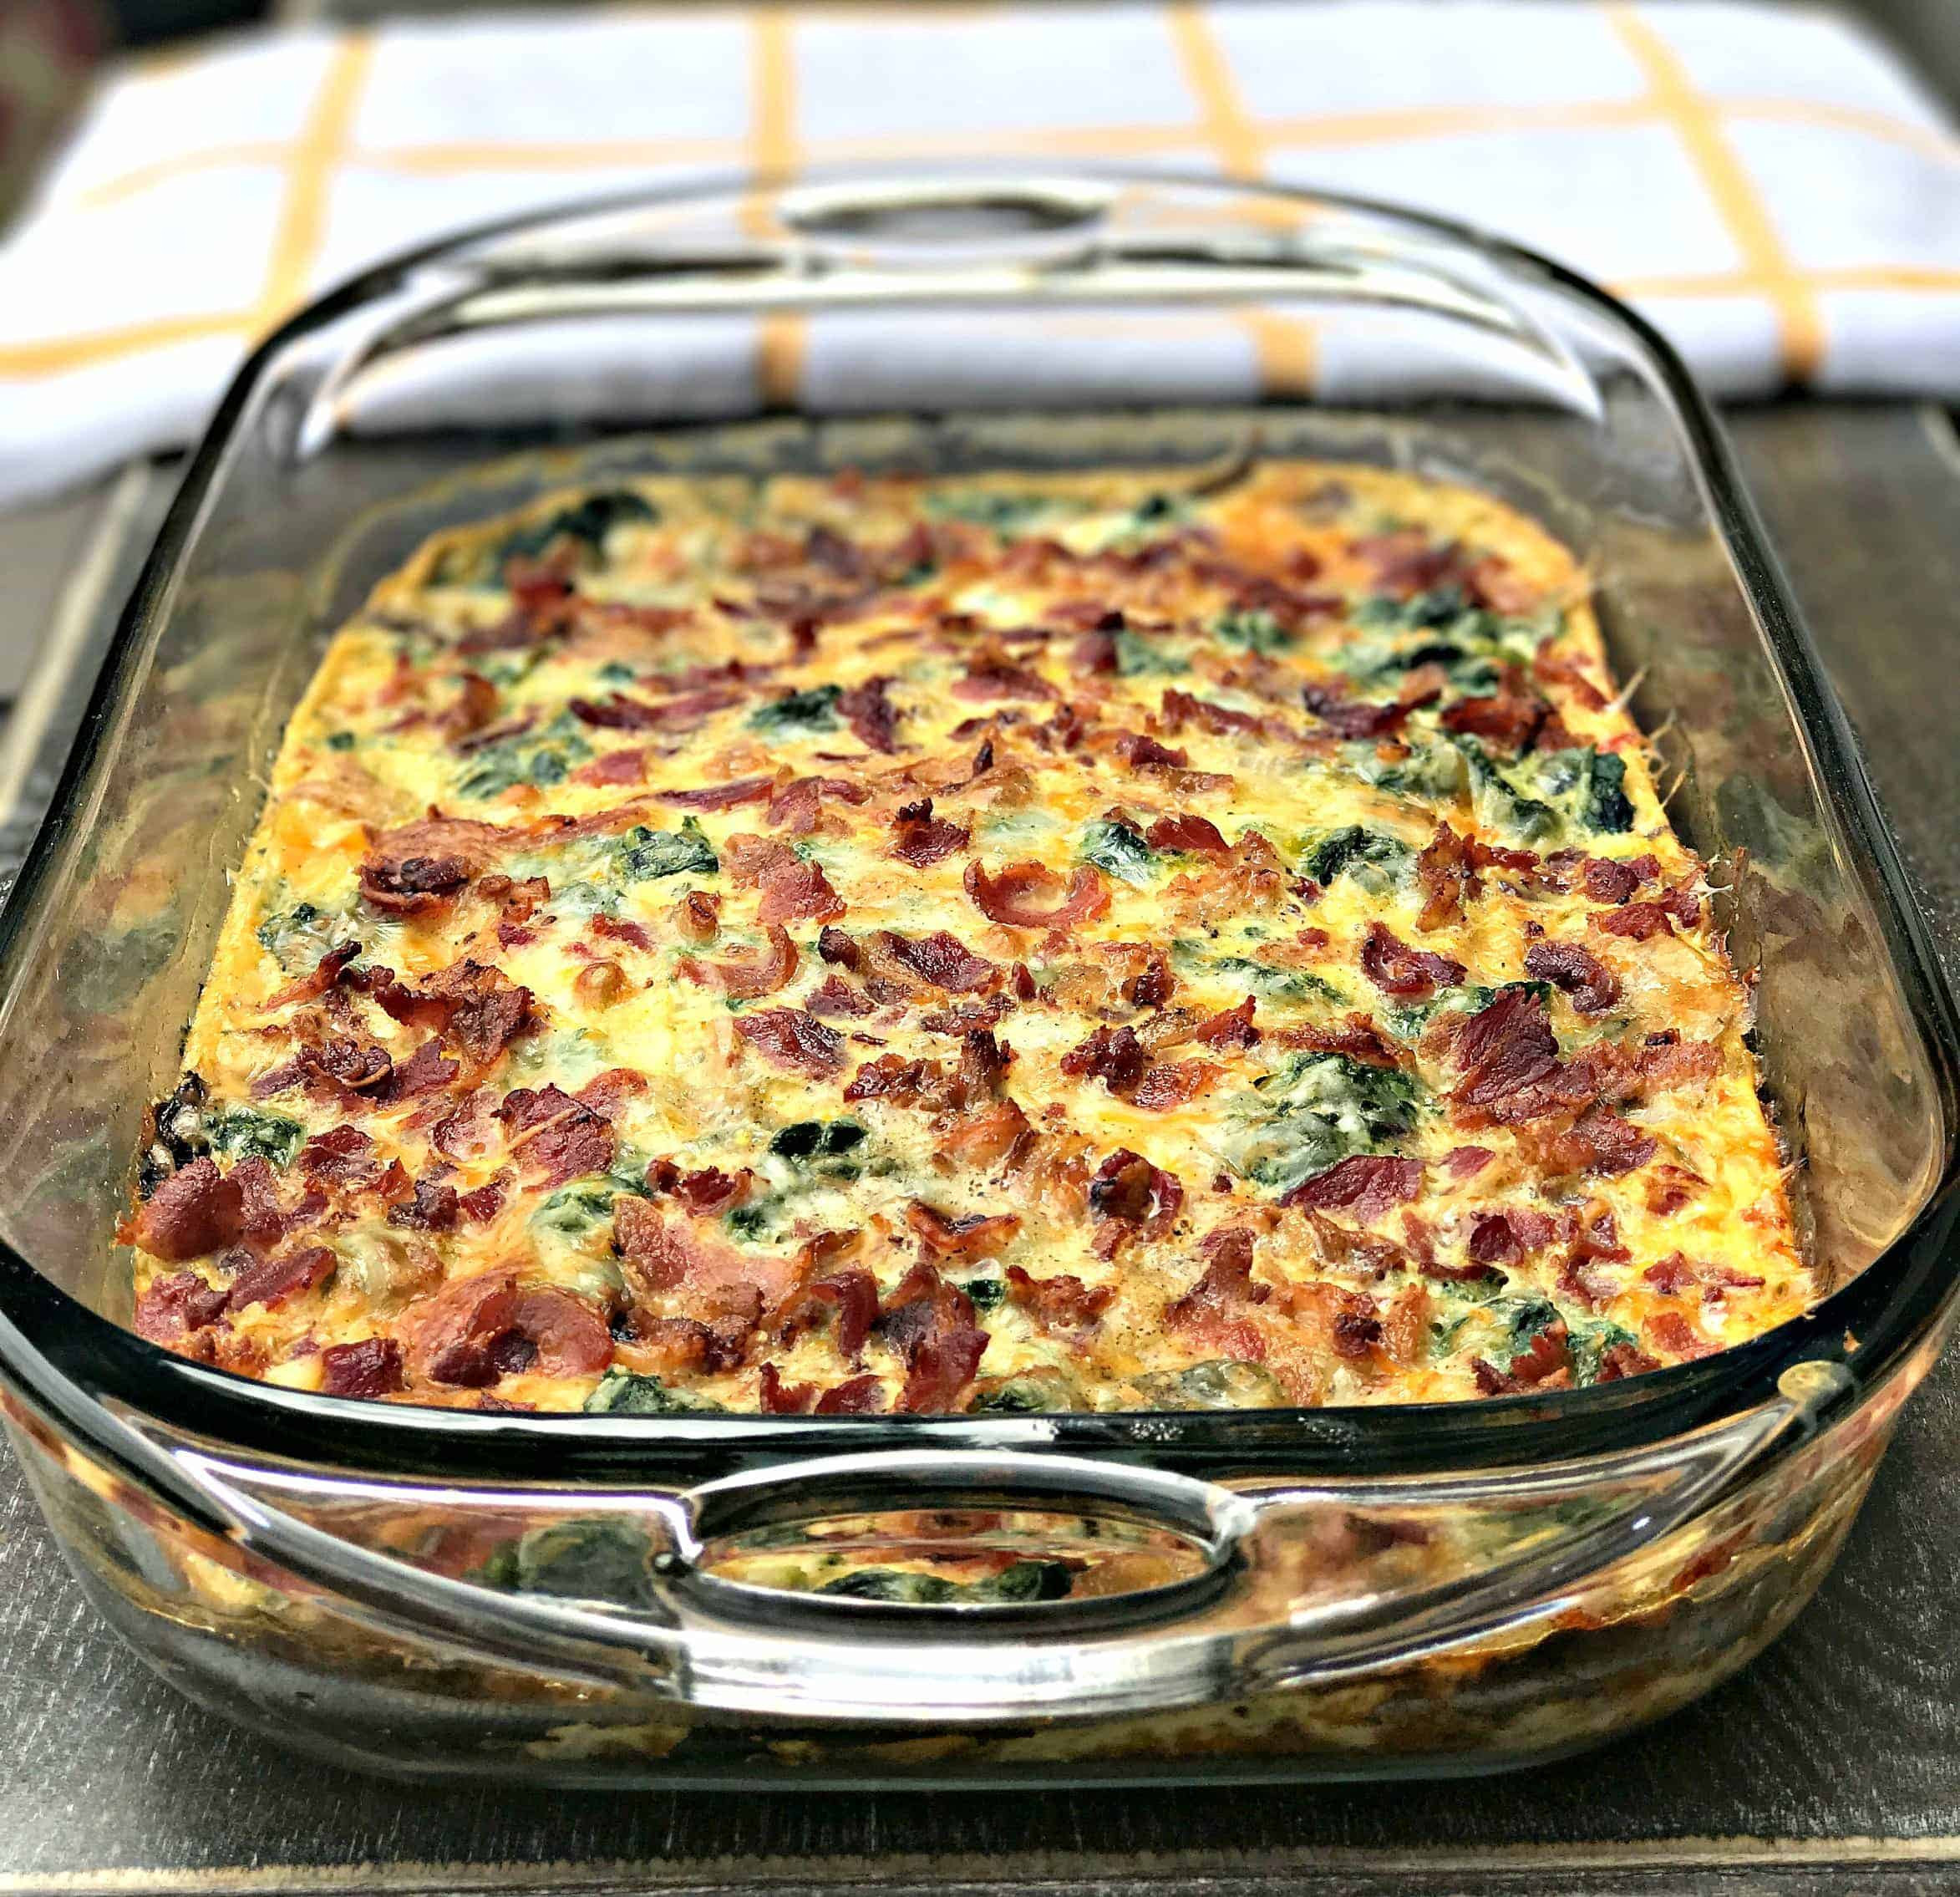 Keto Breakfast Casserole Bacon
 Low Carb Bacon Egg and Spinach Breakfast Casserole